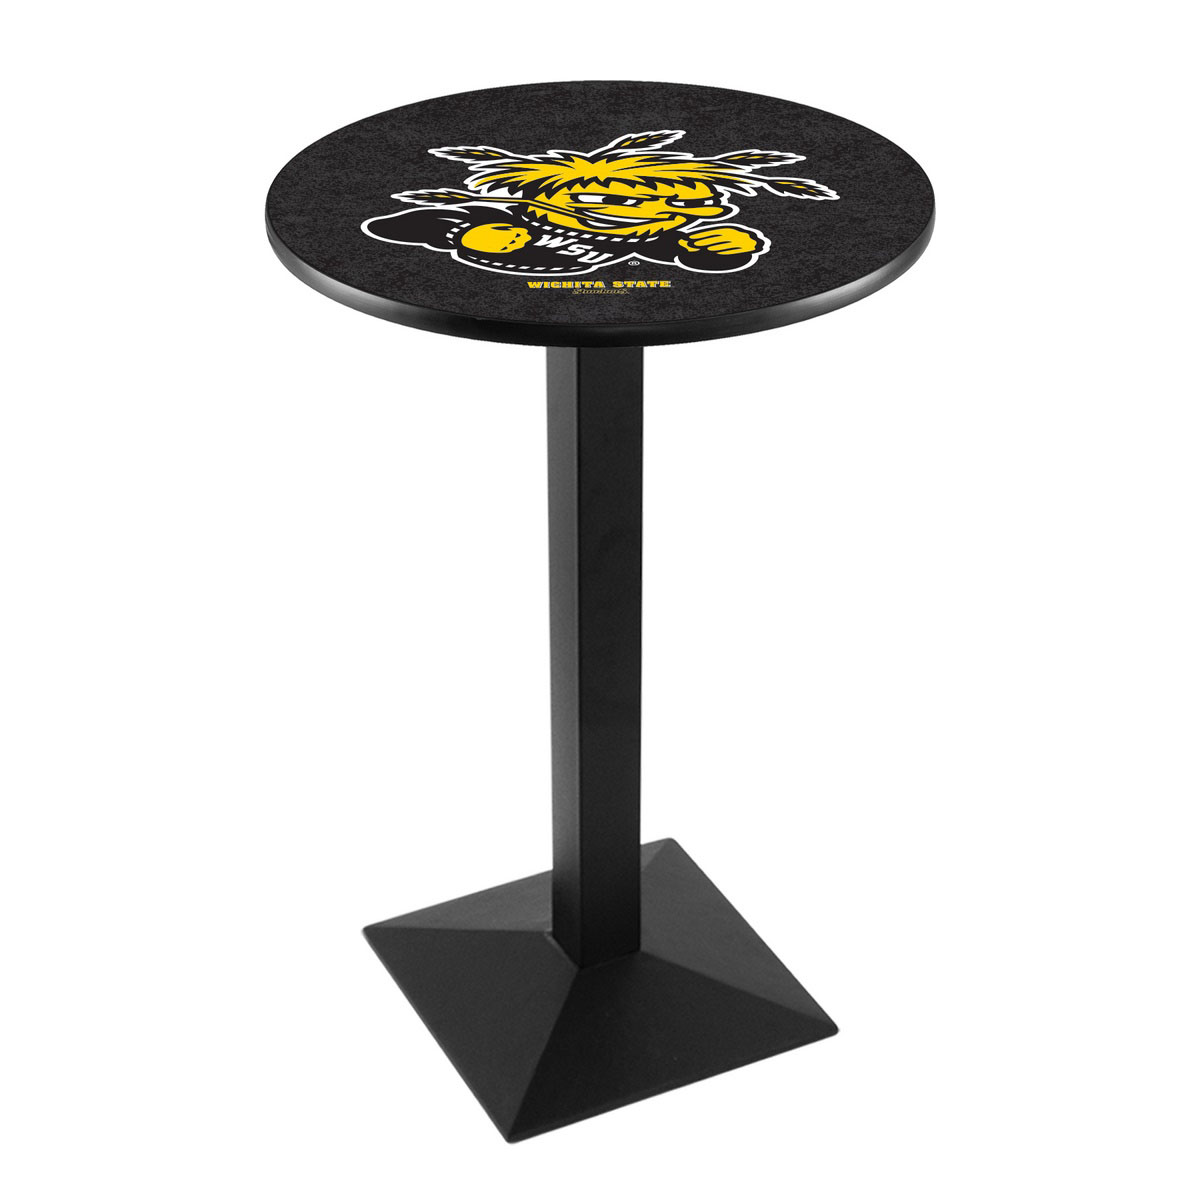 Wichita State University Logo Pub Bar Table With Square Stand